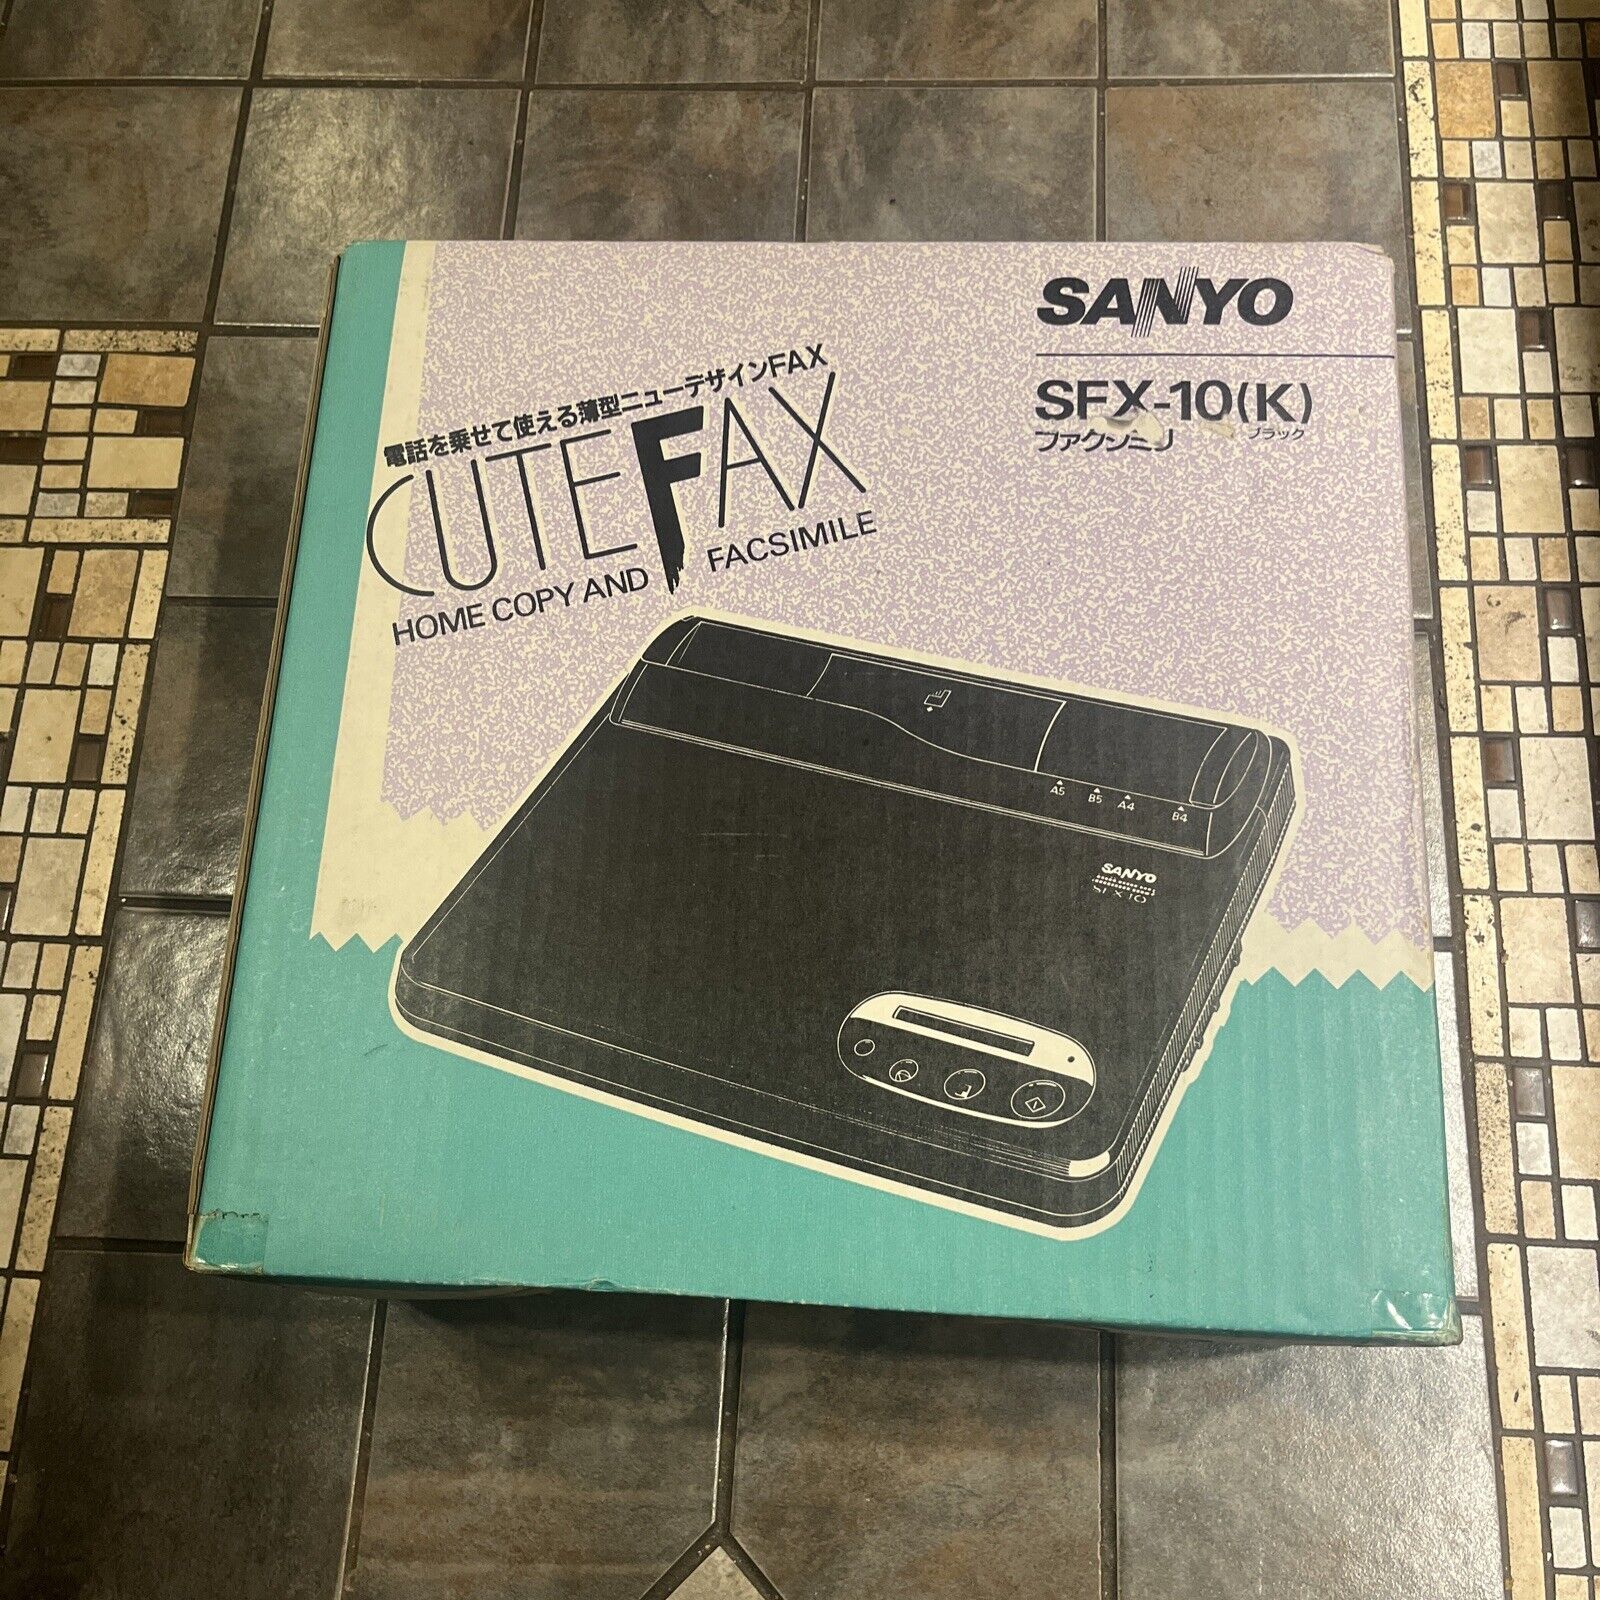 Sanyo SFX-10 (K) Personal Facsimile Transceiver Fax Machine | Rare Japan Only 